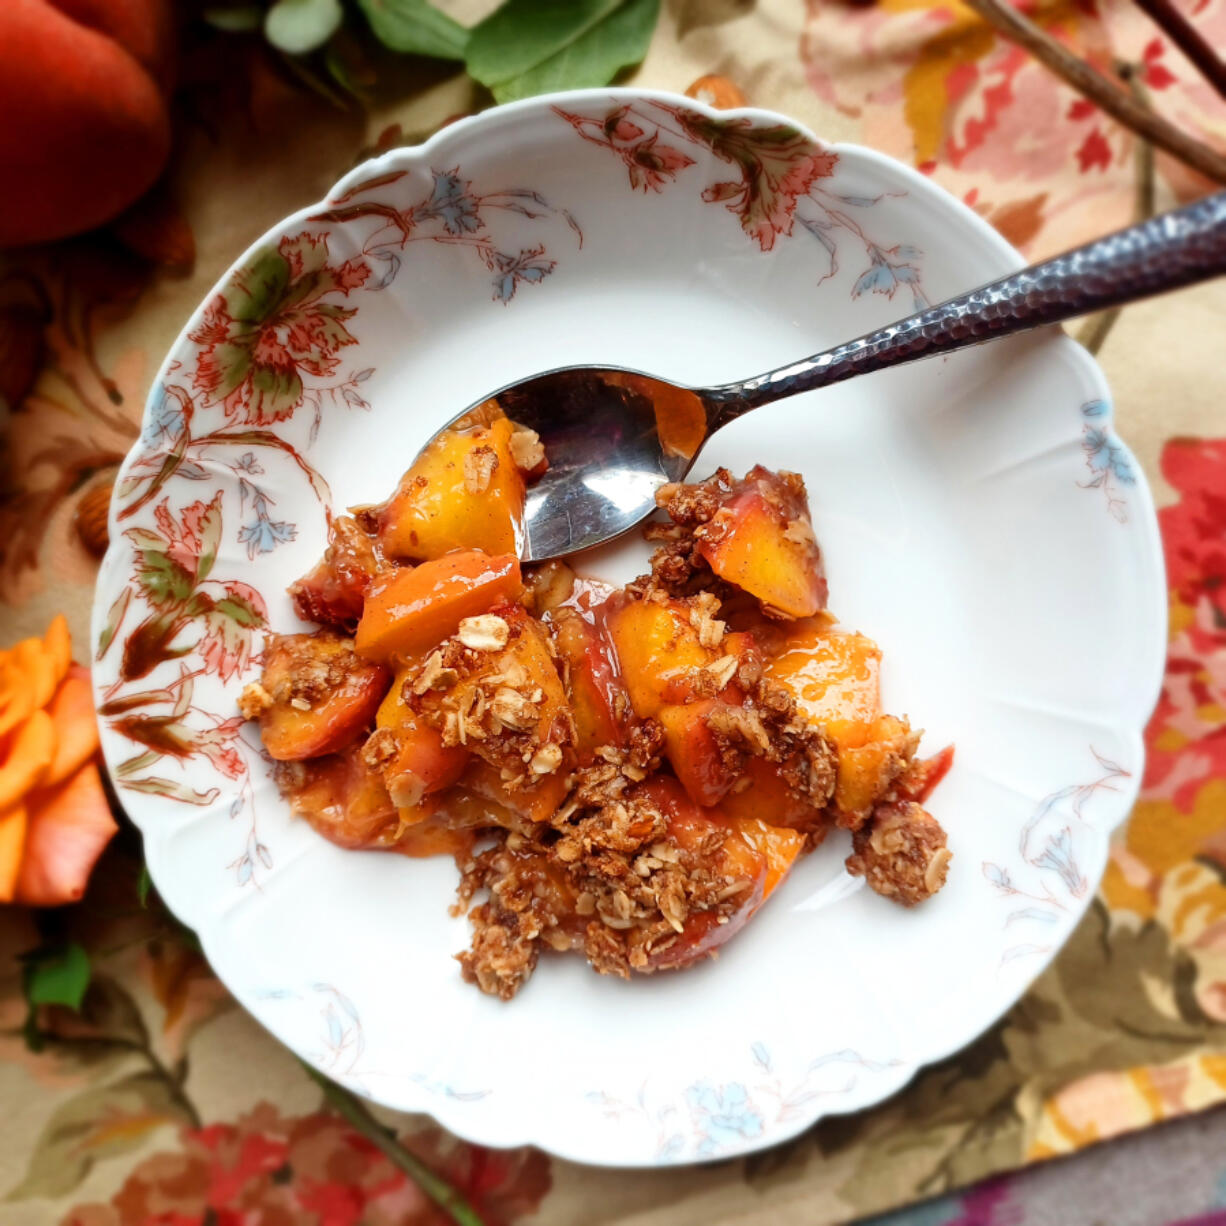 Eat dessert first with this peach breakfast crisp, a slightly healthier version of the popular dessert with a little less sugar and fat.